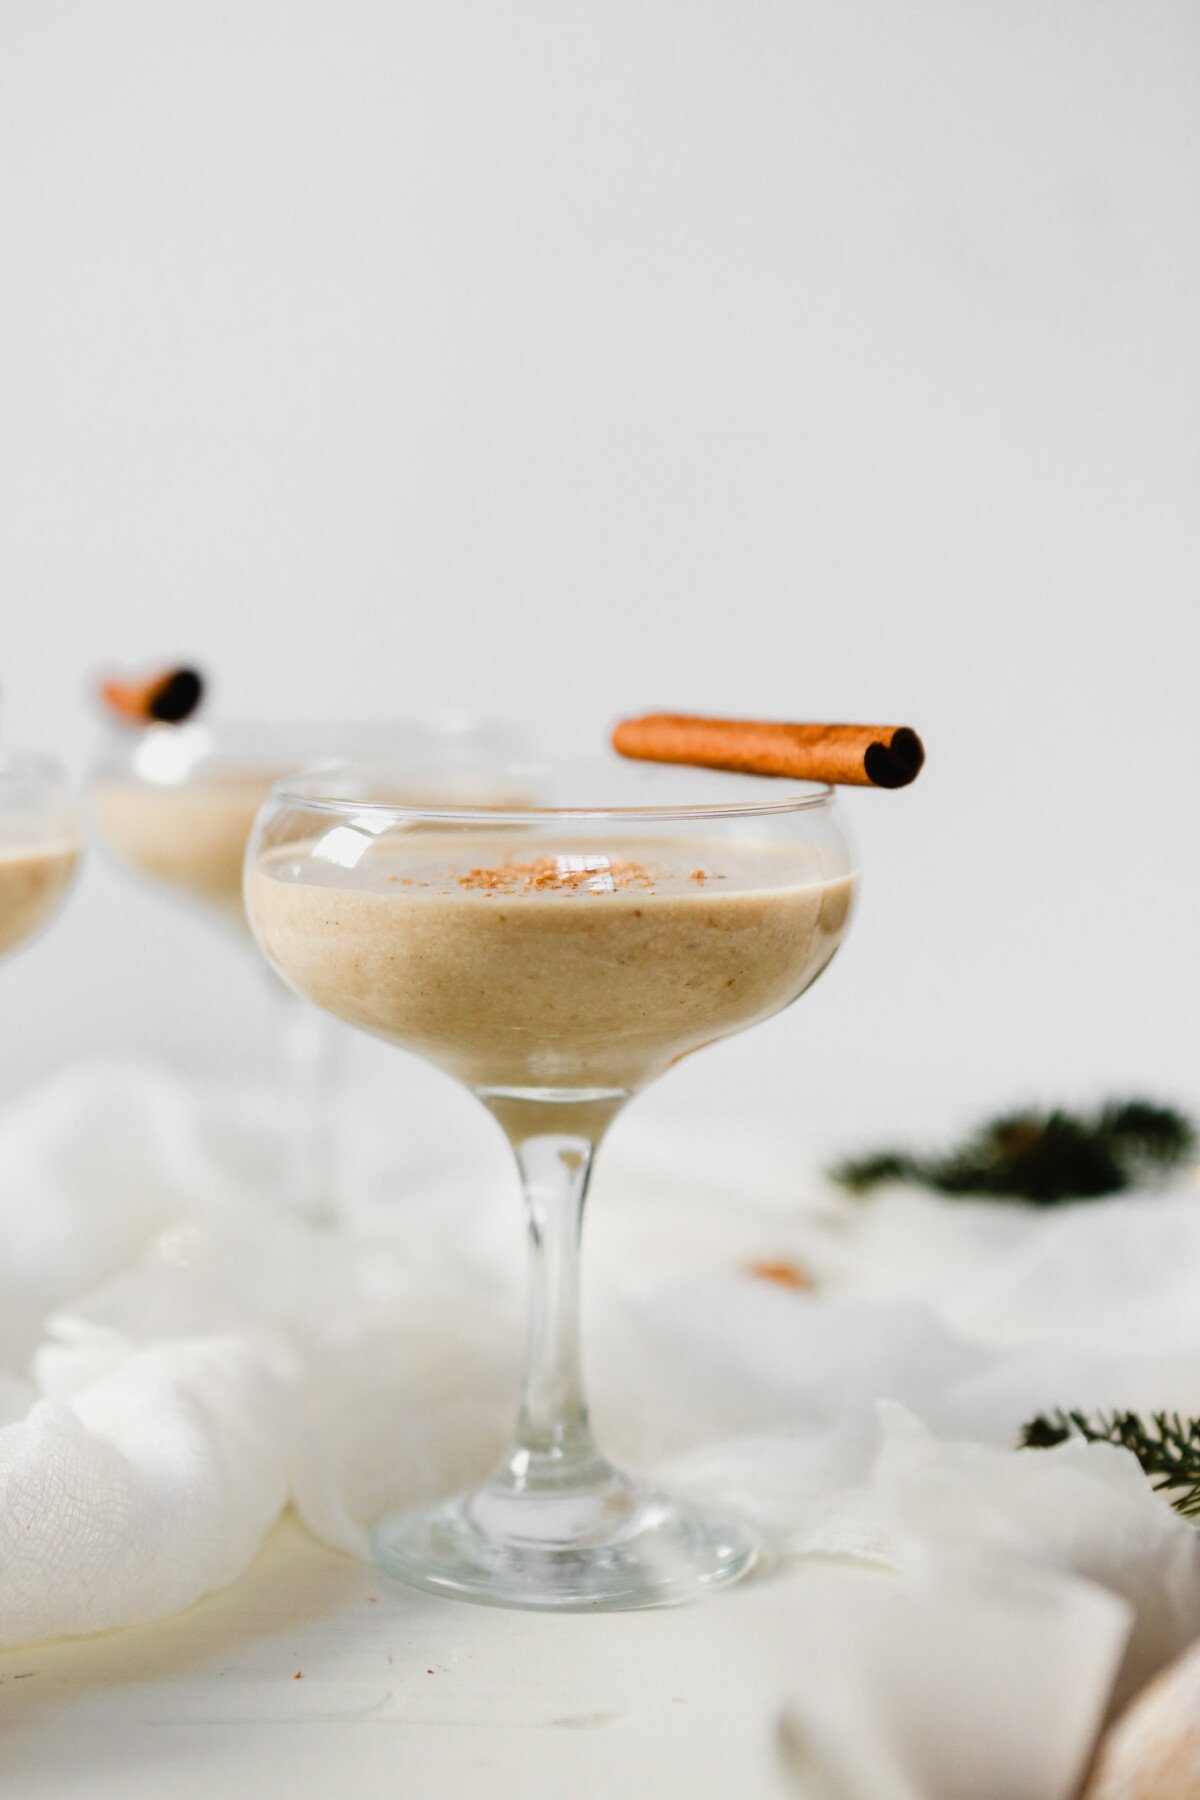 Photograph of homemade eggnog in a coupr glass set on a white wooden table.